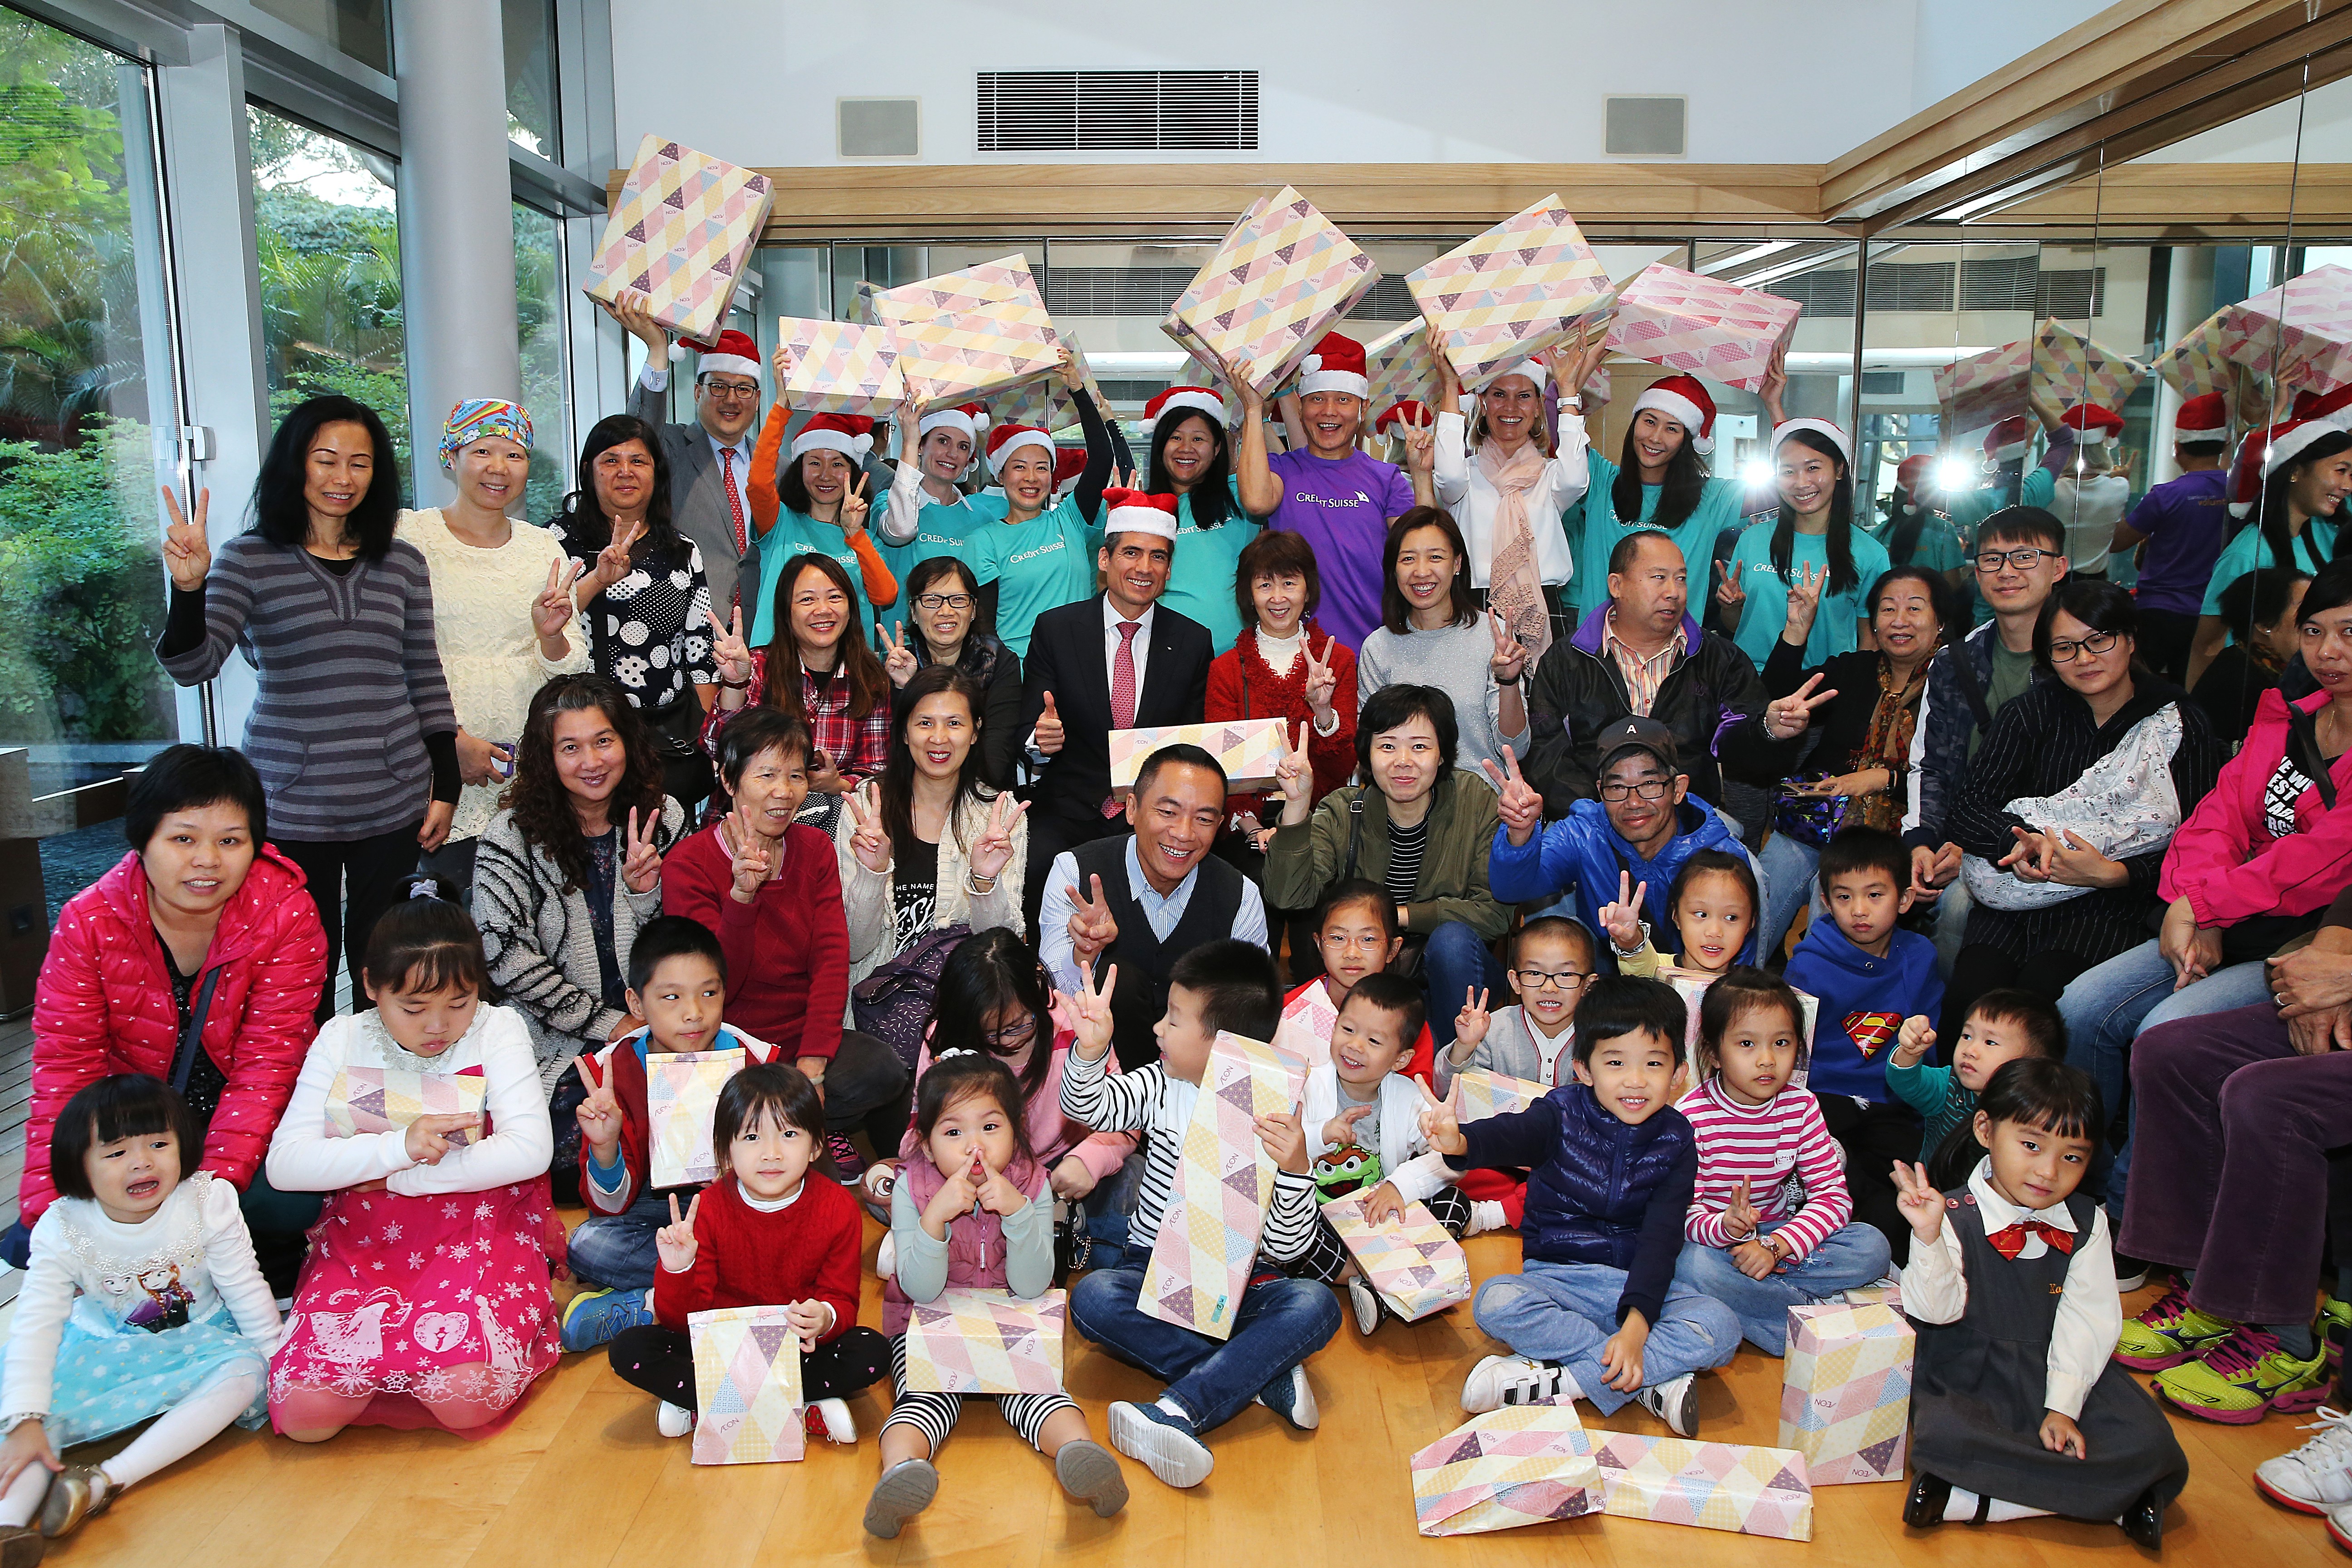 Financial services firm Credit Suisse hosts party at support facility in Tuen Mun, with their managing director riding in as Santa Claus